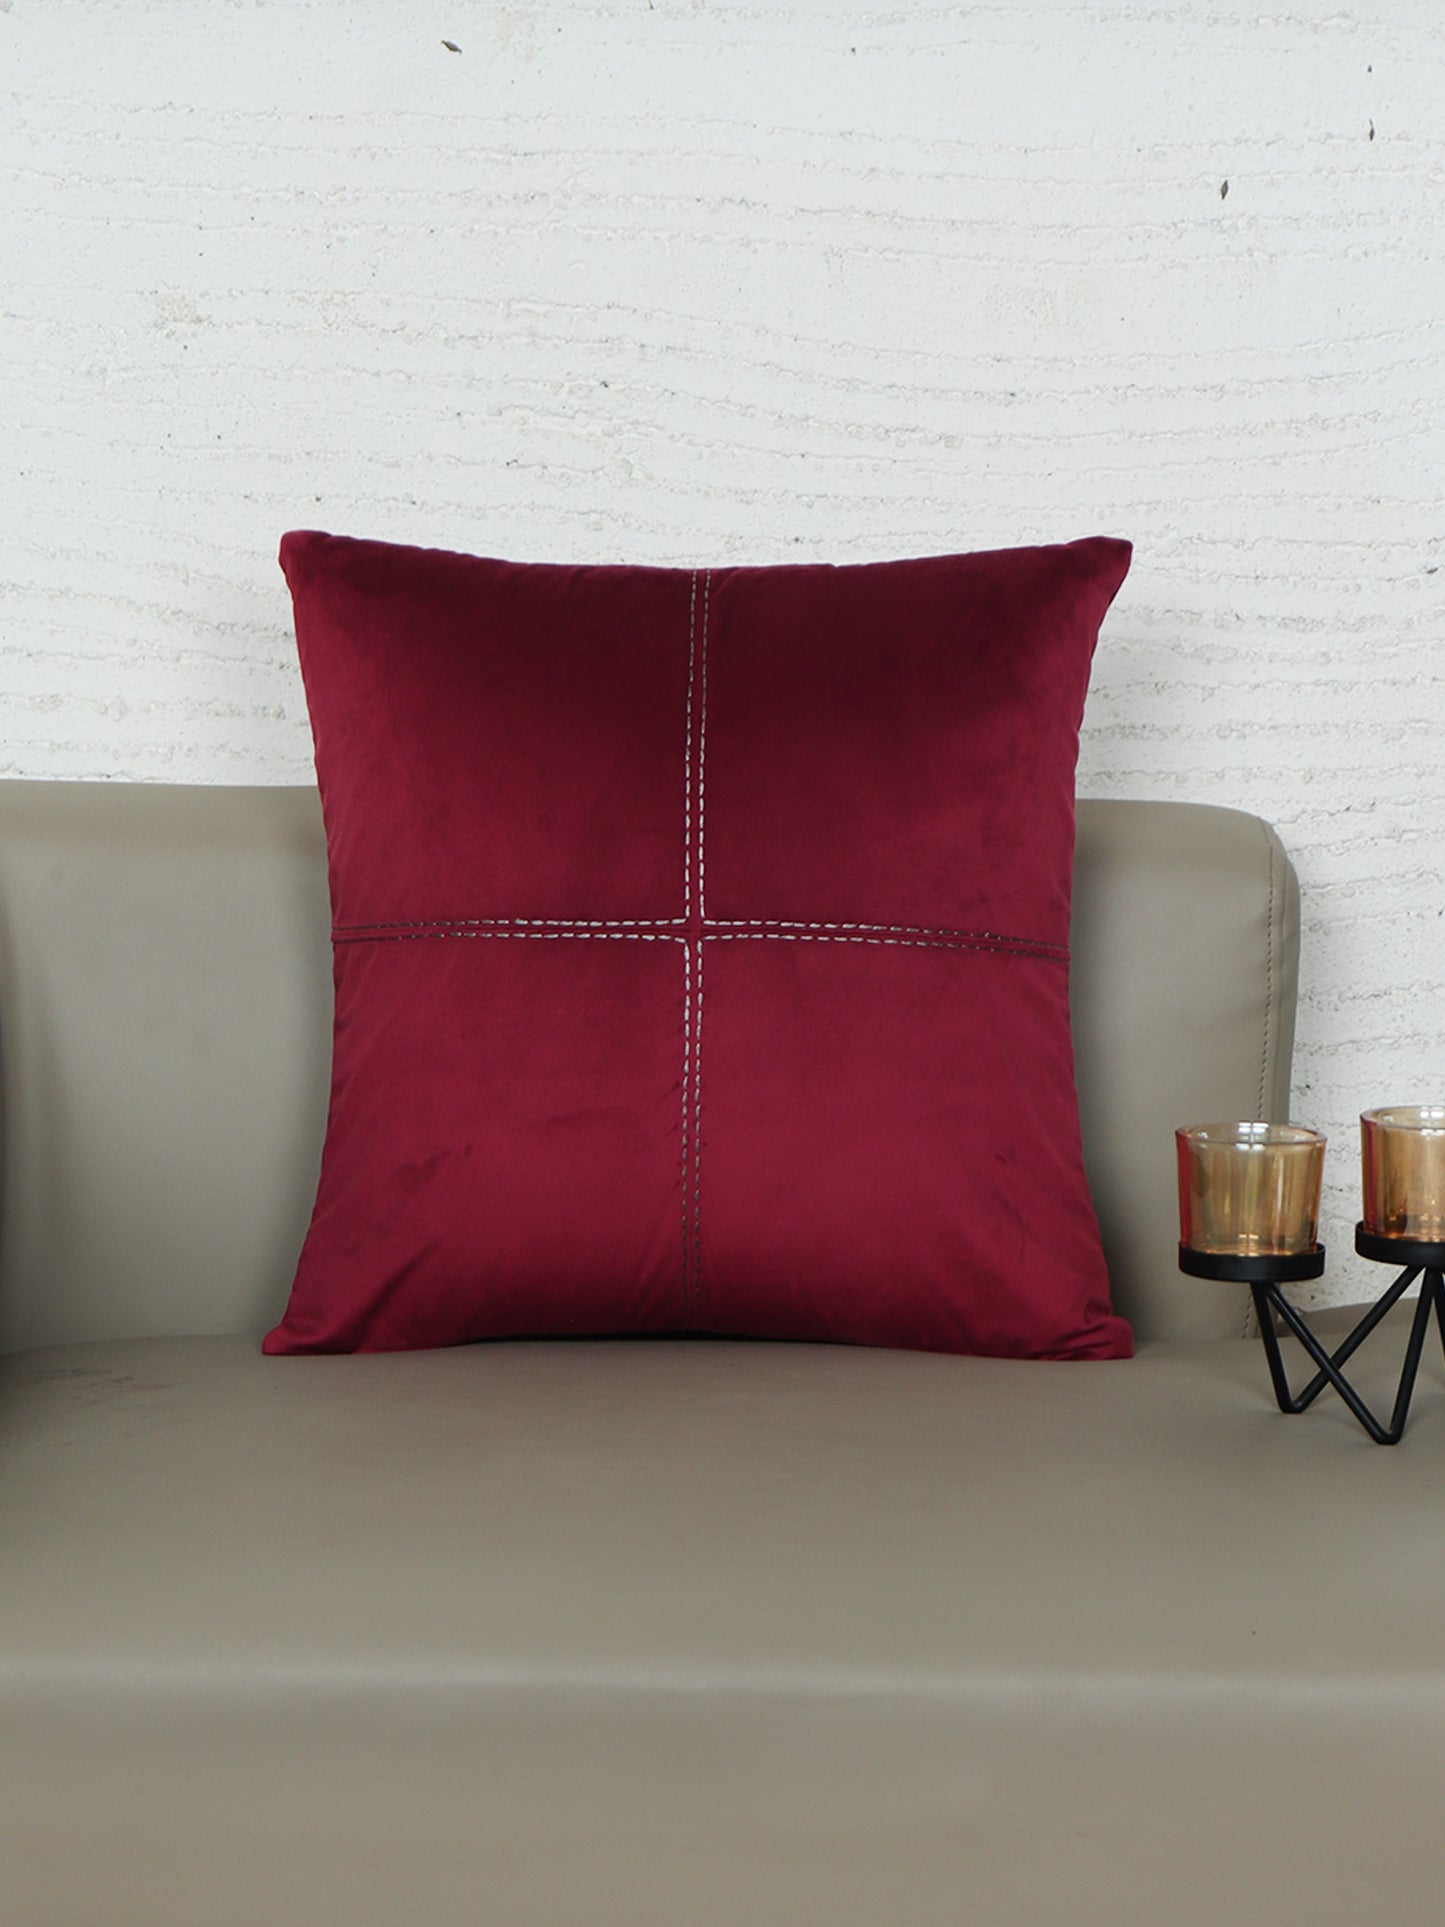 Hand Embroidered Velvet Cushion Cover - Luxe Collection | Sofa, Bedroom, Couch | Maroon - 16x16 inch (40x40 cms) (Pack of 1)